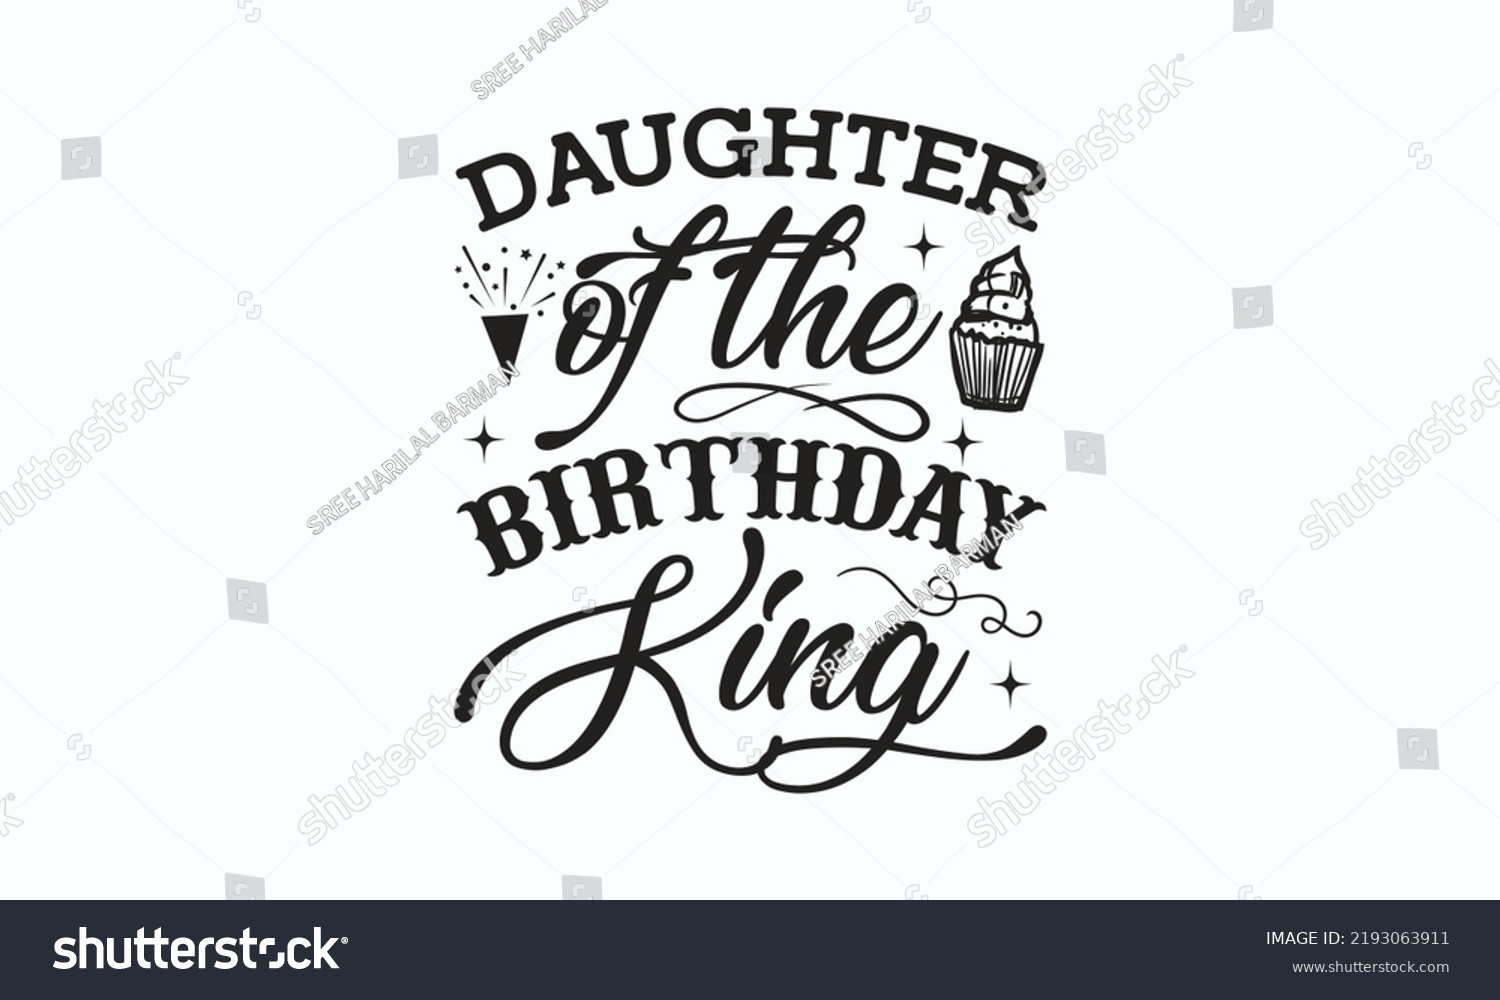 SVG of Daughter of the birthday king - Birthday SVG Digest typographic vector design for greeting cards, Birthday cards, Good for scrapbooking, posters, templet, textiles, gifts, and wedding sets. design.  svg